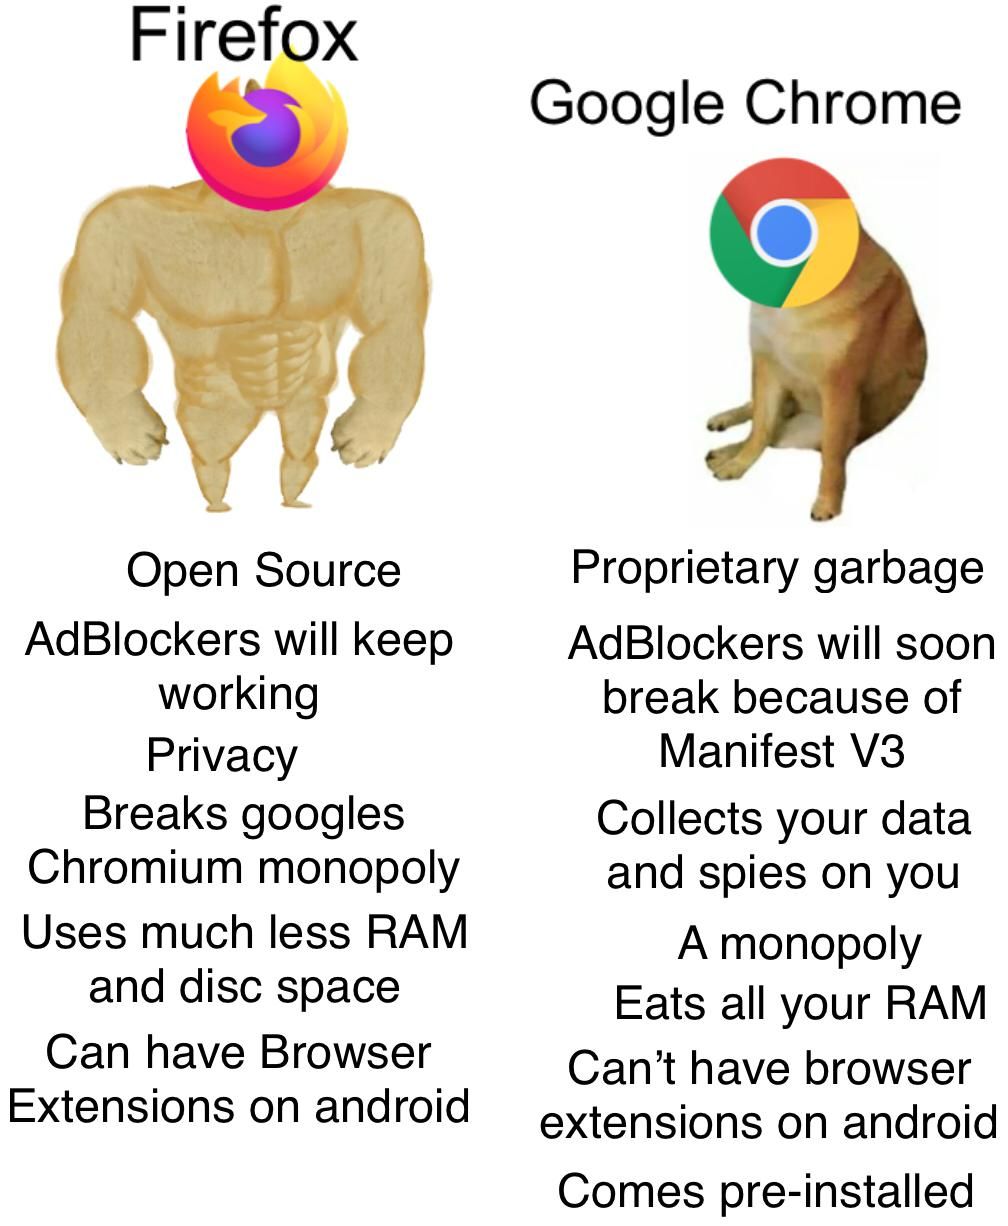 Chrome is truly the worst browser...